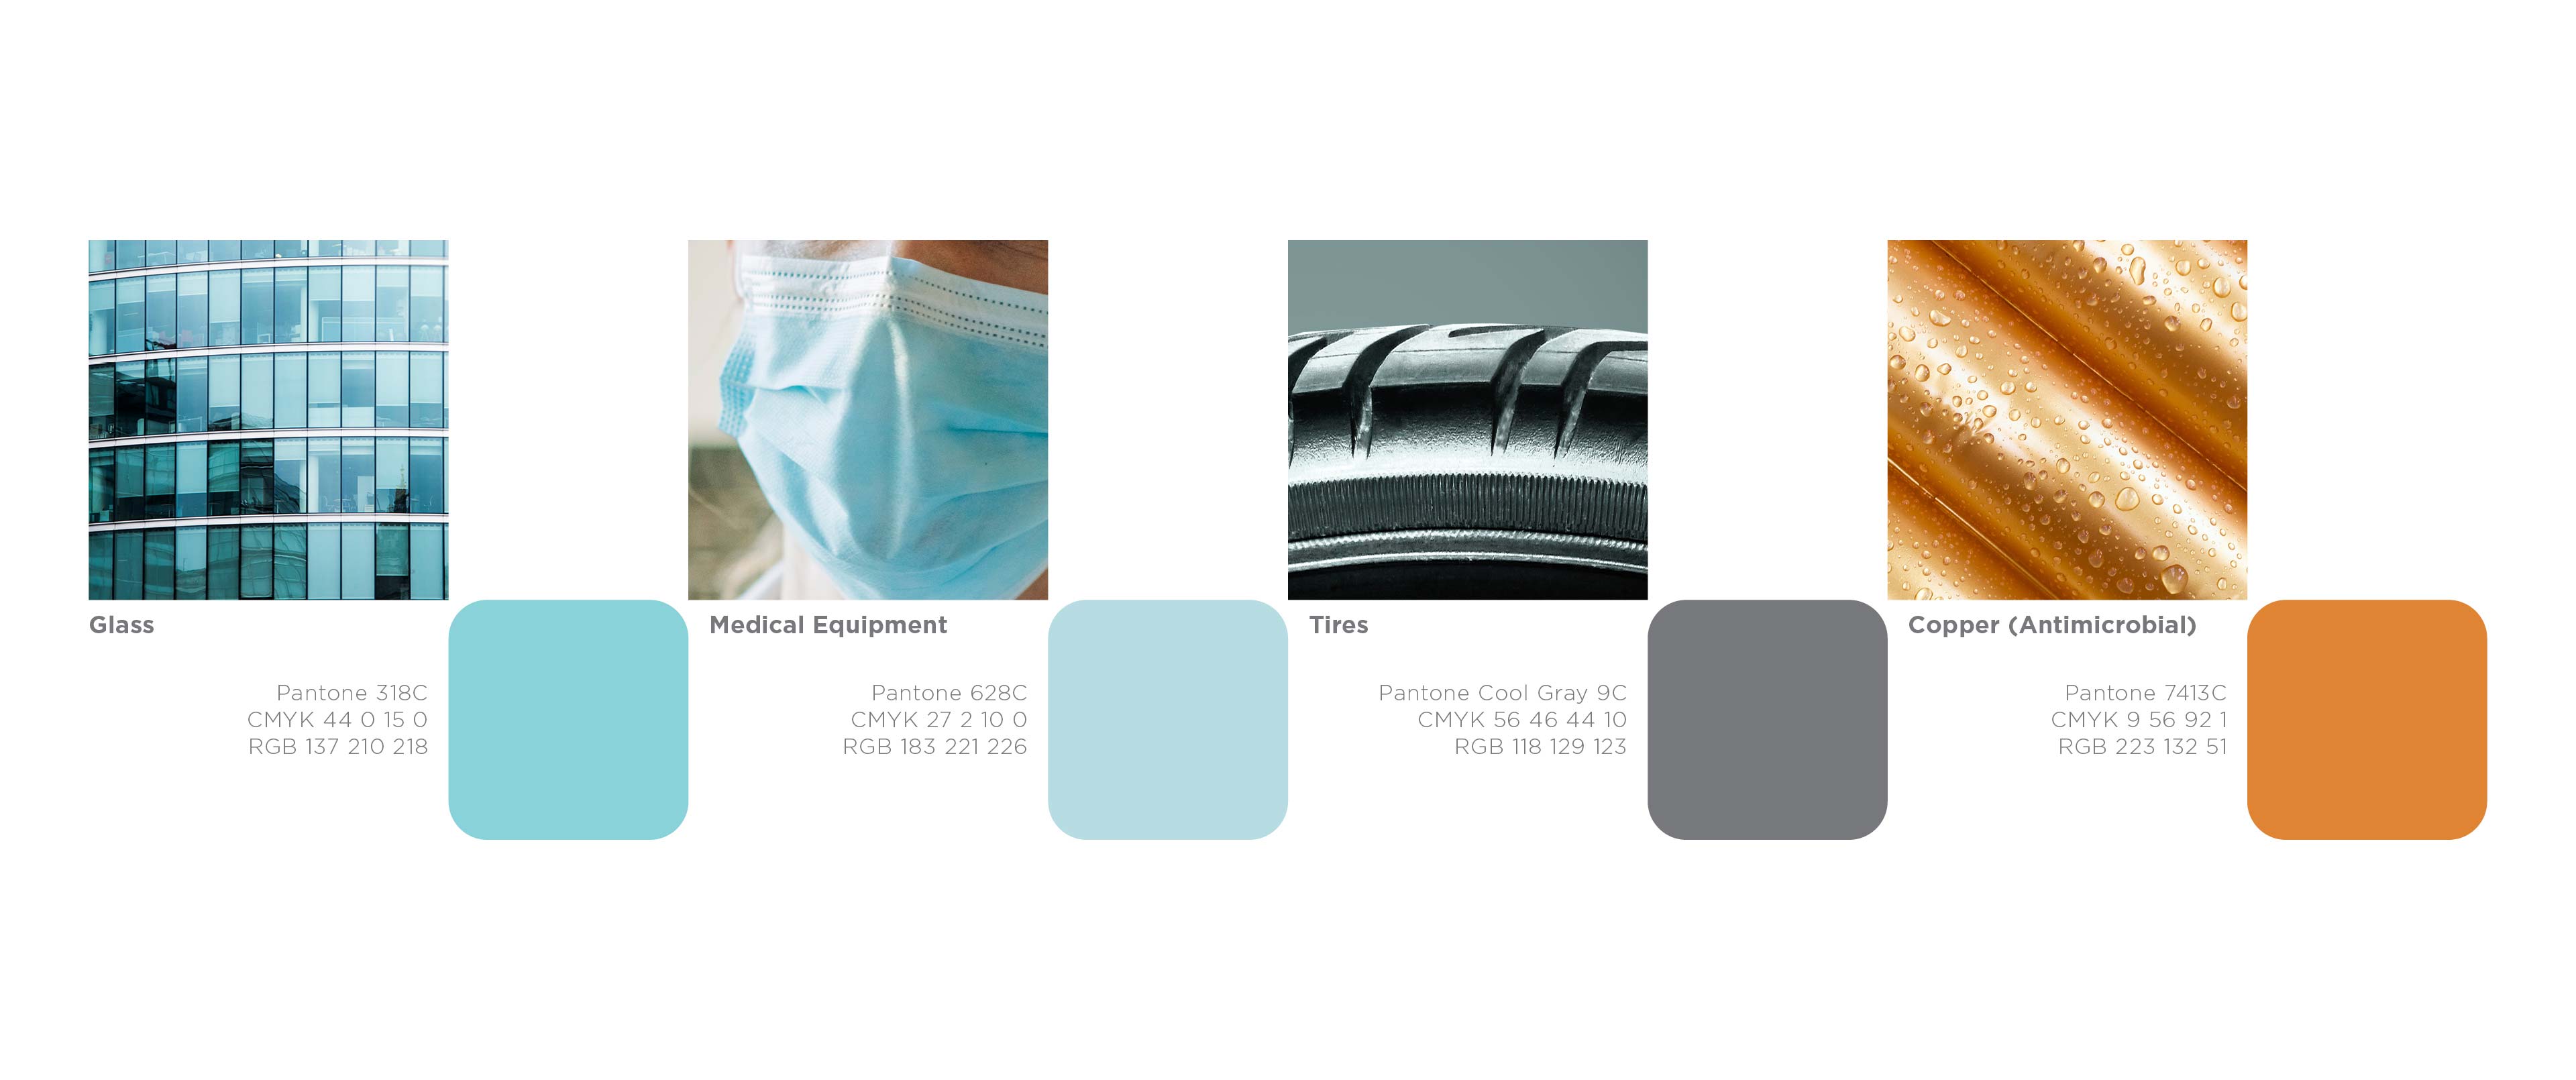 The inspriation for the turquoise tints, gray, and copper colors in the A-Plus brand identity come from the medical and transportation industry objects and materials.